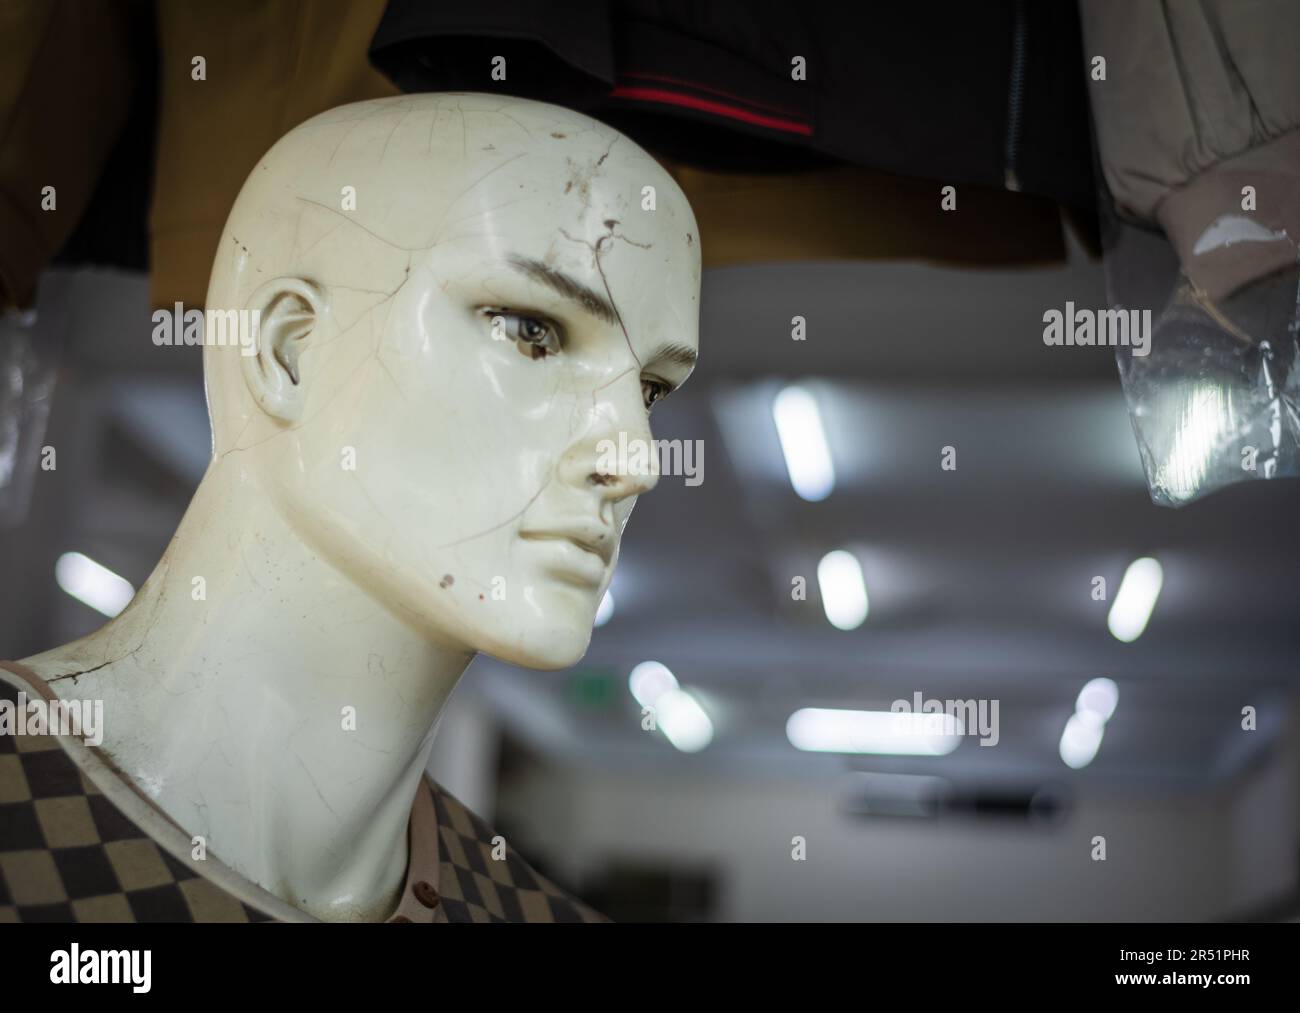 A battered shop dummy, or mannequin, in a shop in Danang, Vietnam Stock Photo